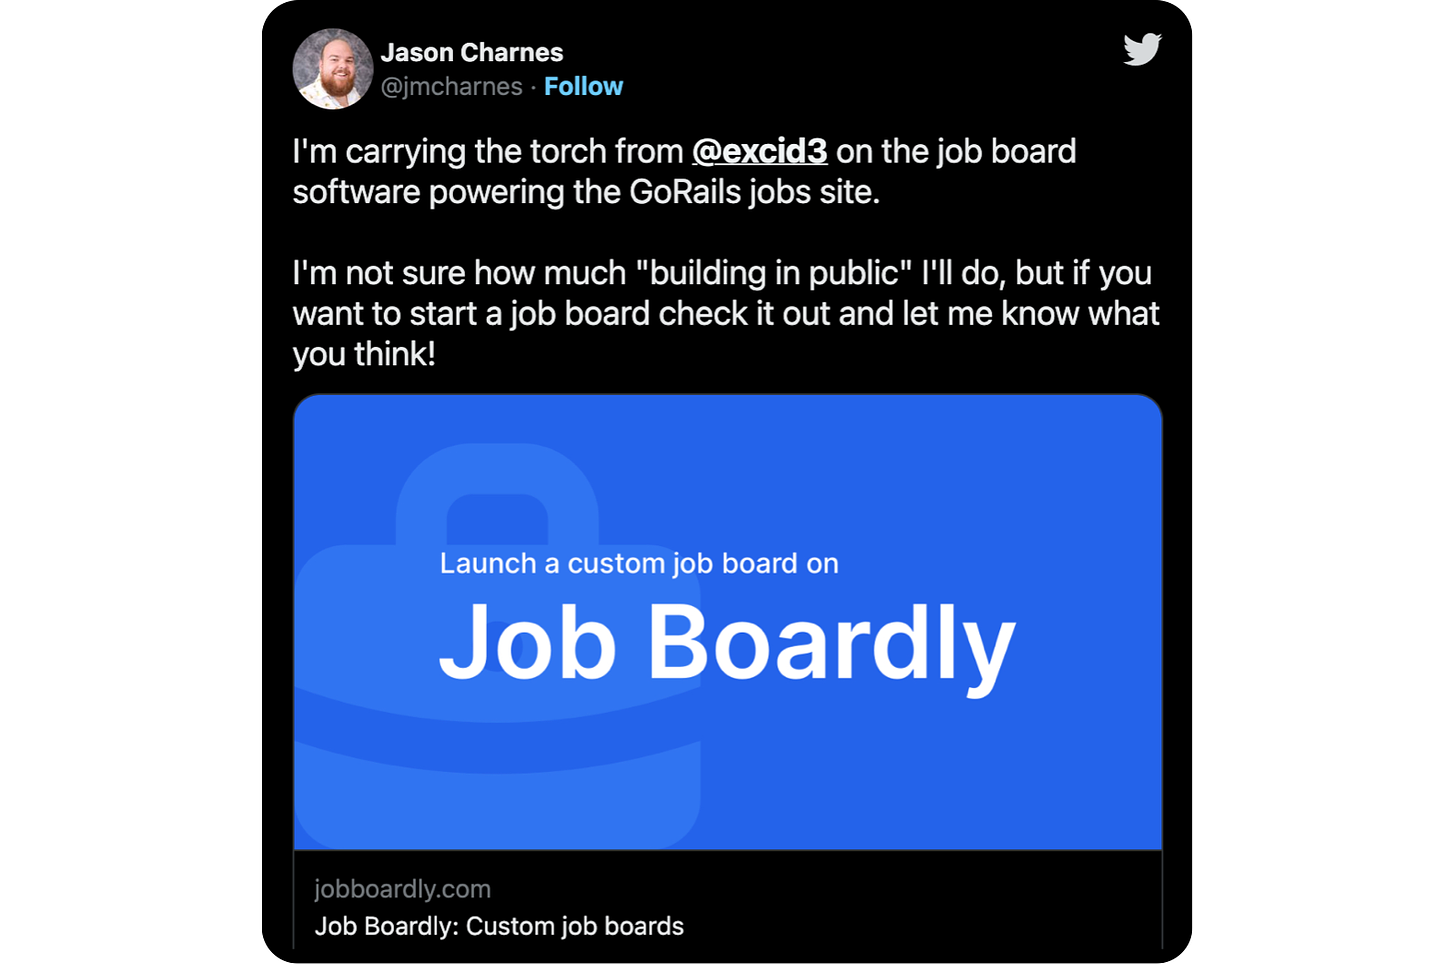 I'm carrying the torch from @excid3 on the job board software powering the GoRails jobs site. I'm not sure how much "building in public" I'll do, but if you want to start a job board check it out and let me know what you think!